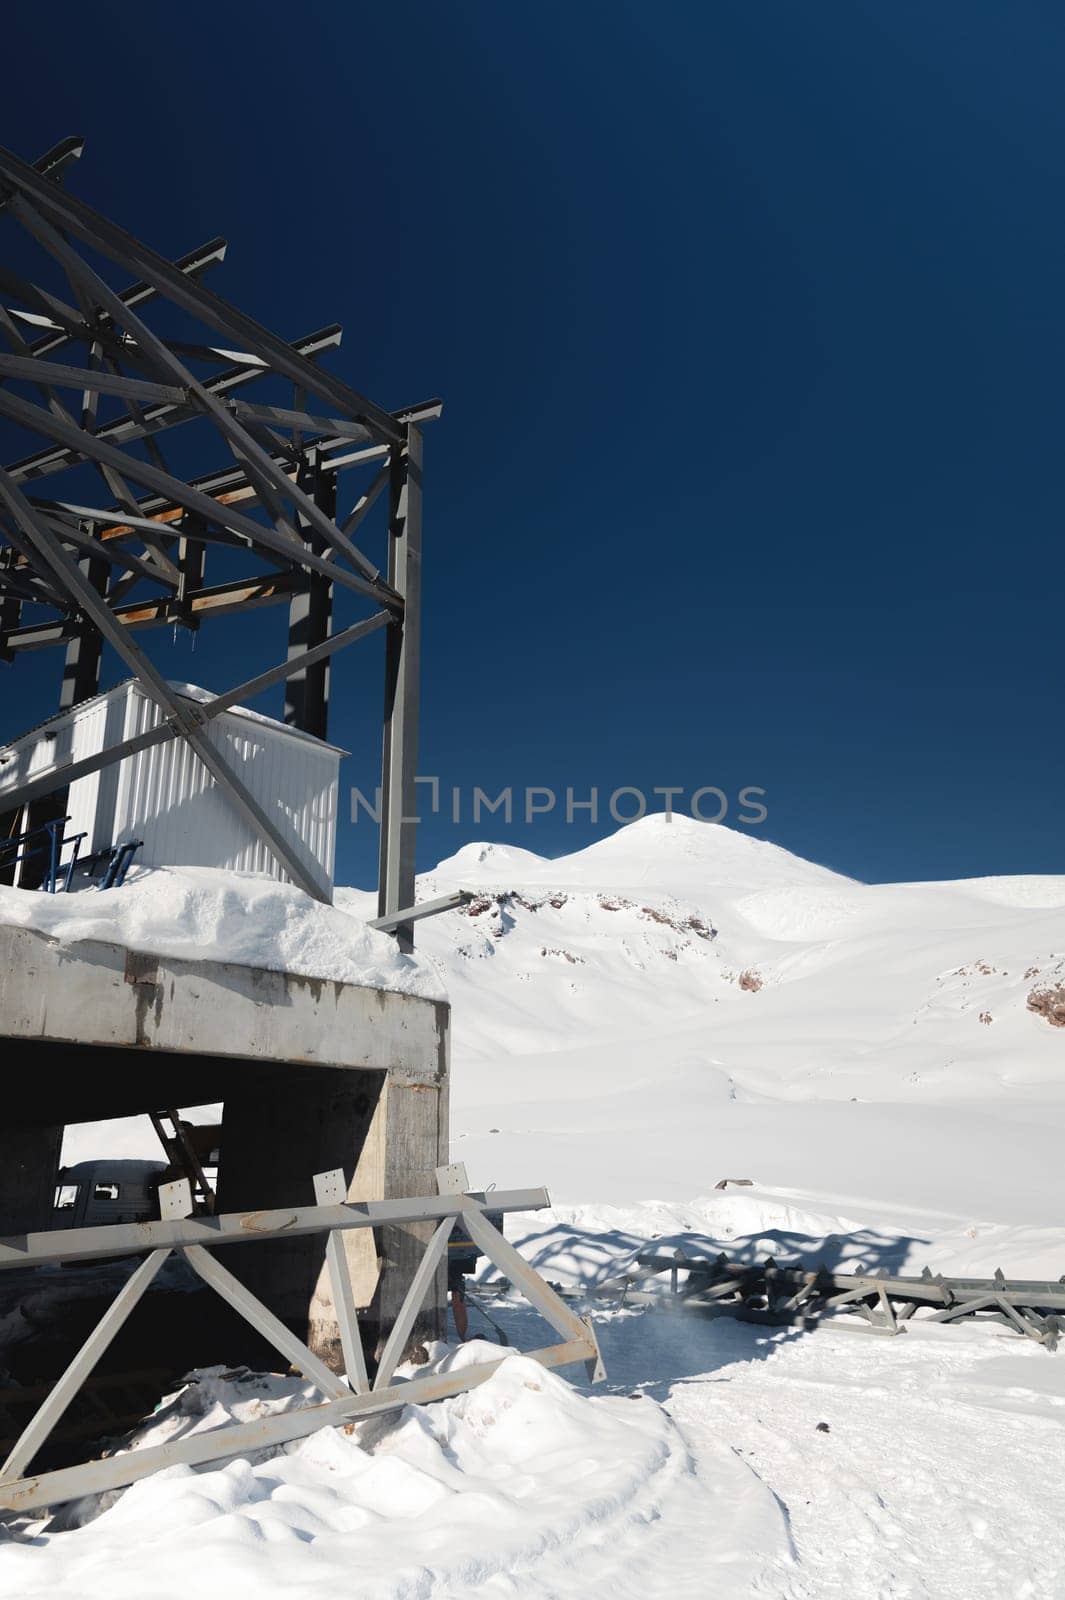 A cable car station high in the mountains under construction. Snowy mountain landscape and construction of a metal structure for a cable car.